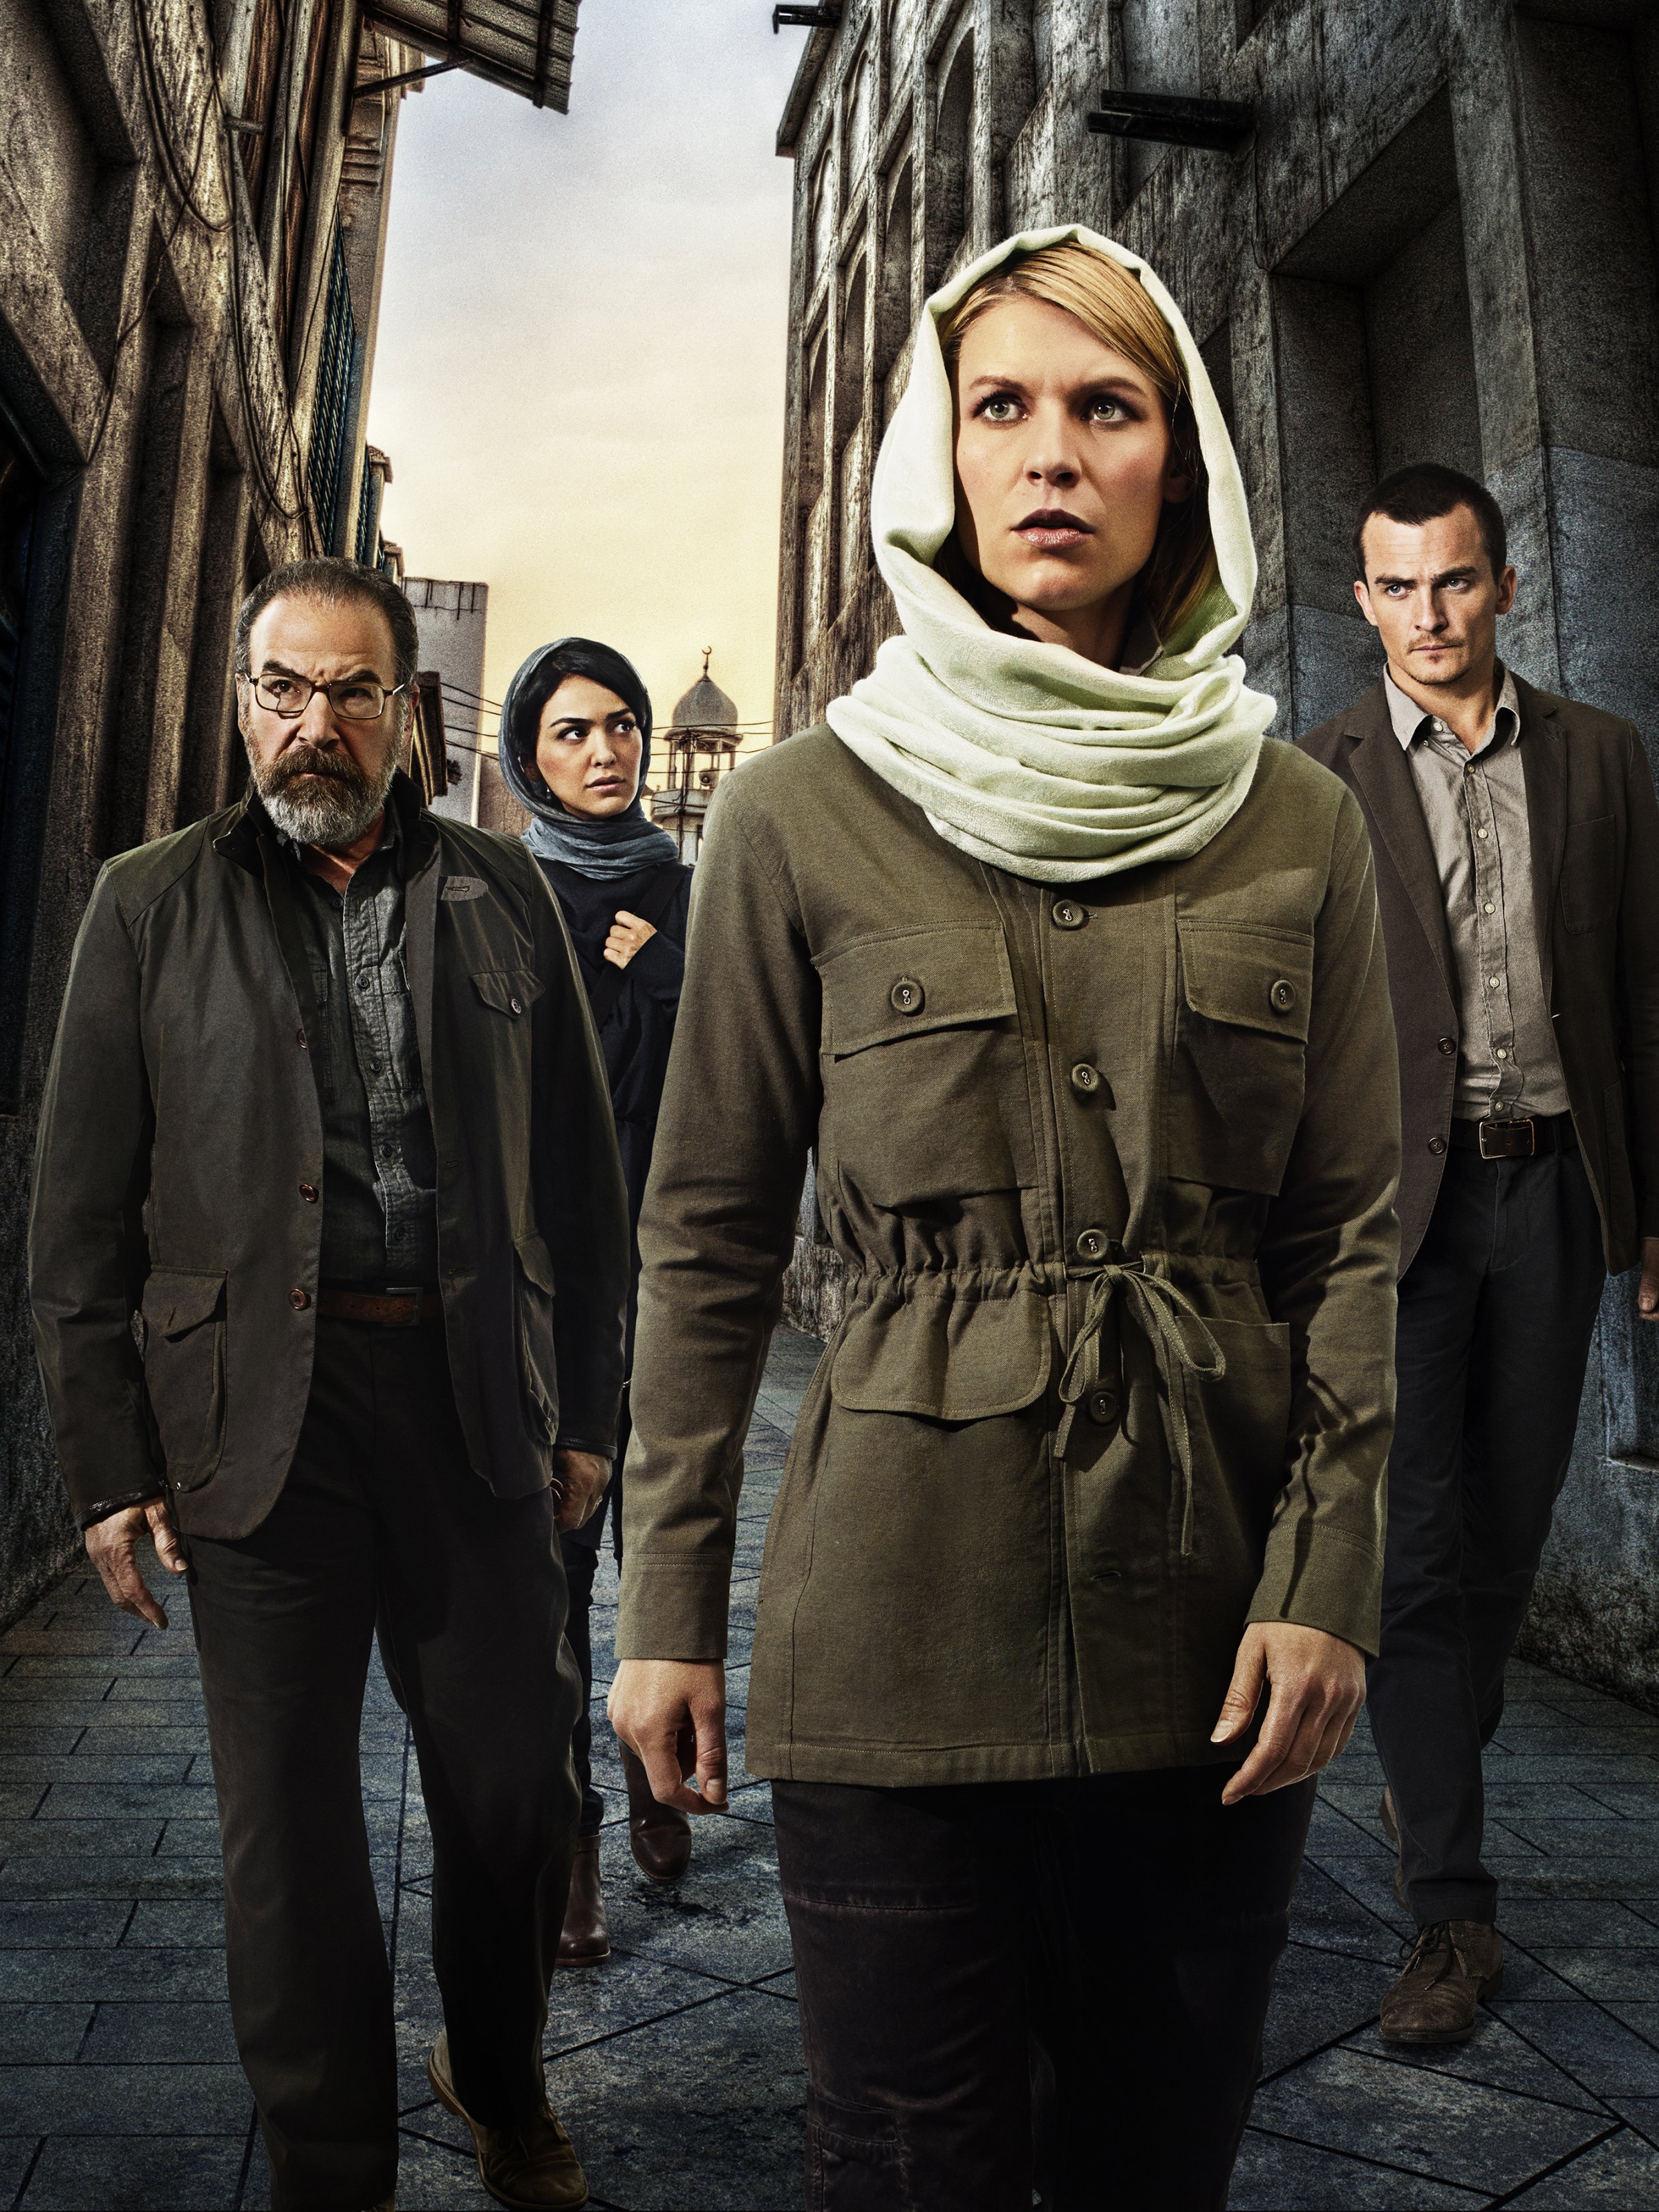 Claire Danes as Carrie Mathison in Homeland.